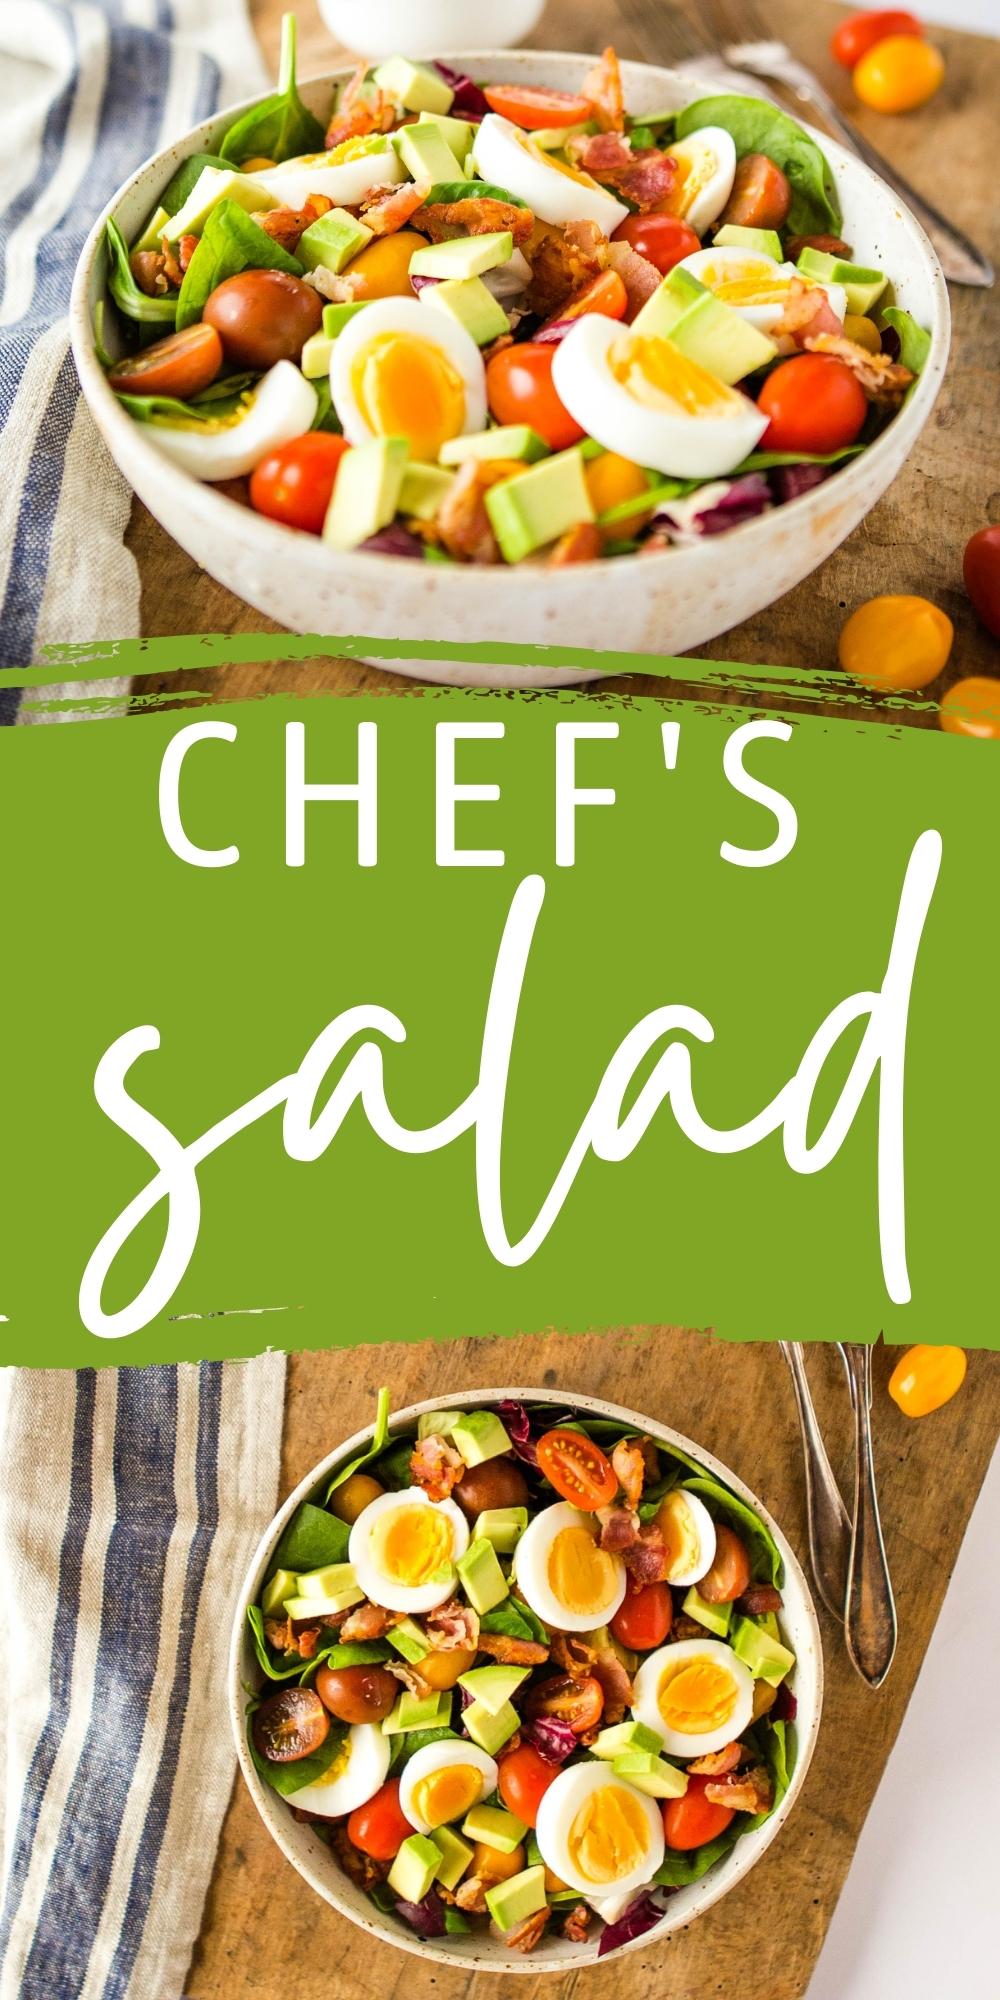 This Chef's Salad with Egg is a filling, protein-packed salad made with hard boiled eggs, avocado, bacon, veggies, & ranch dressing! Recipe from thebusybaker.ca! #cobbsalad #chefssalad #chefsalad #saladwithegg #avocado #bacon #lunch #protein #healthy #keto #lowcarb via @busybakerblog